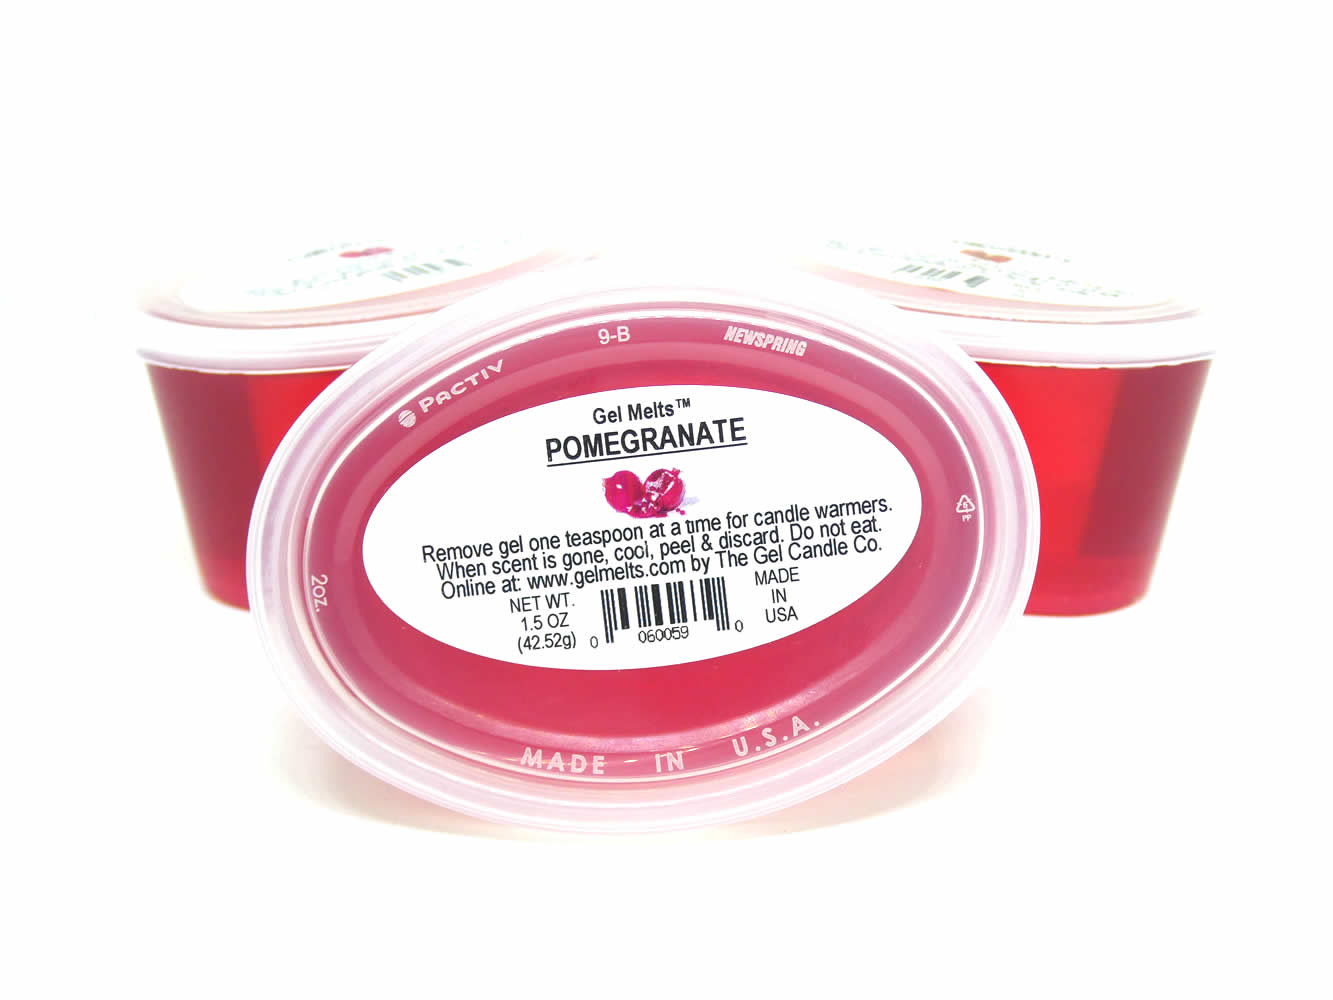 Pomegranate scented Gel Melts™ Gel Wax for warmers - 3 pack